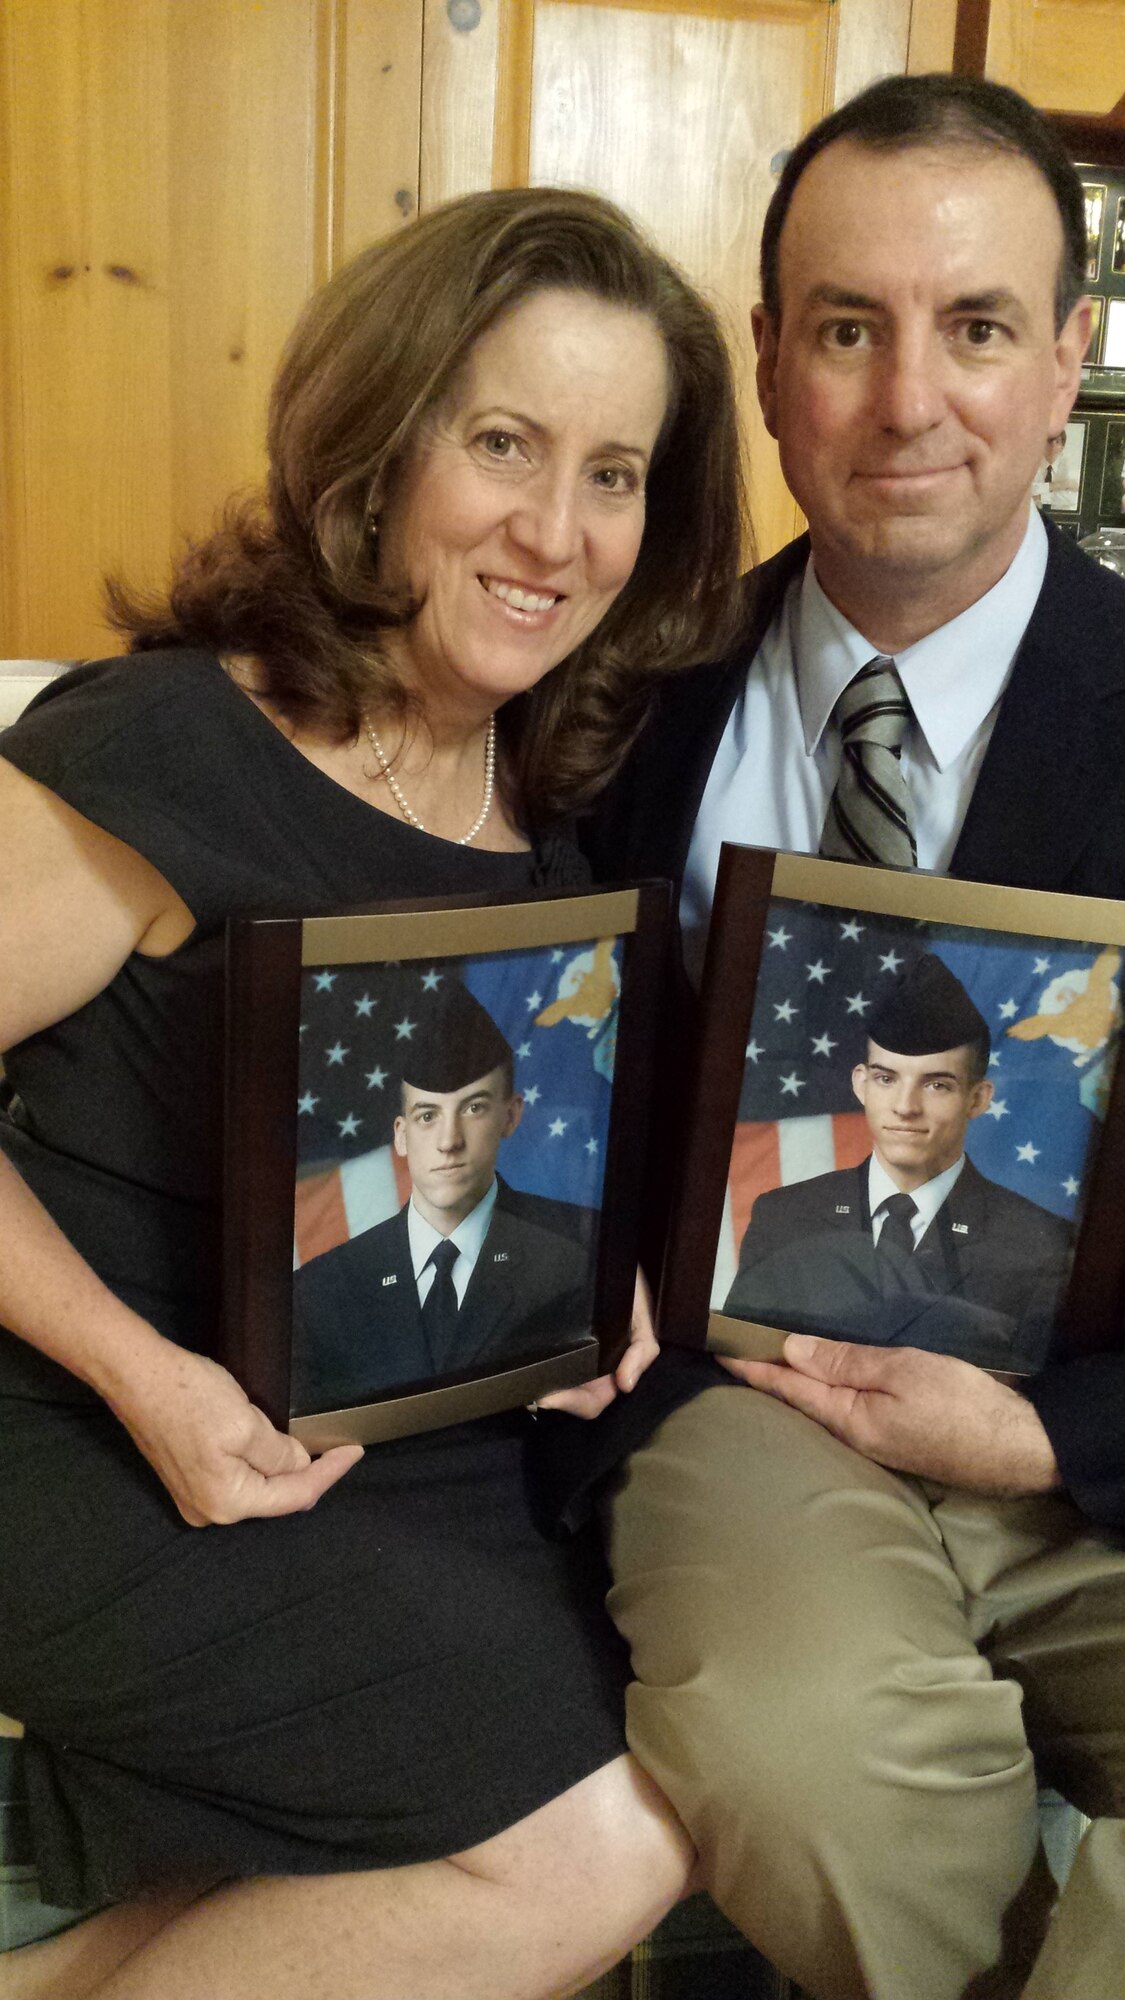 Roxann Burns and retired Chief Master Sgt. Bryan Burns, 60th Operations Support Squadron, pose for a photo in their home Feb. 7, 2017, while holding a photograph of their two children, Matthew and Joshua Burns. Matthew joined the Air Force and is currently a staff sergeant assigned to the 79th Air Refueling Squadron at Travis Air Force Base, Calif. Joshua also joined the Air Force and served nearly nine years as a KC-10 Extender boom operator. (Courtesy Photo)